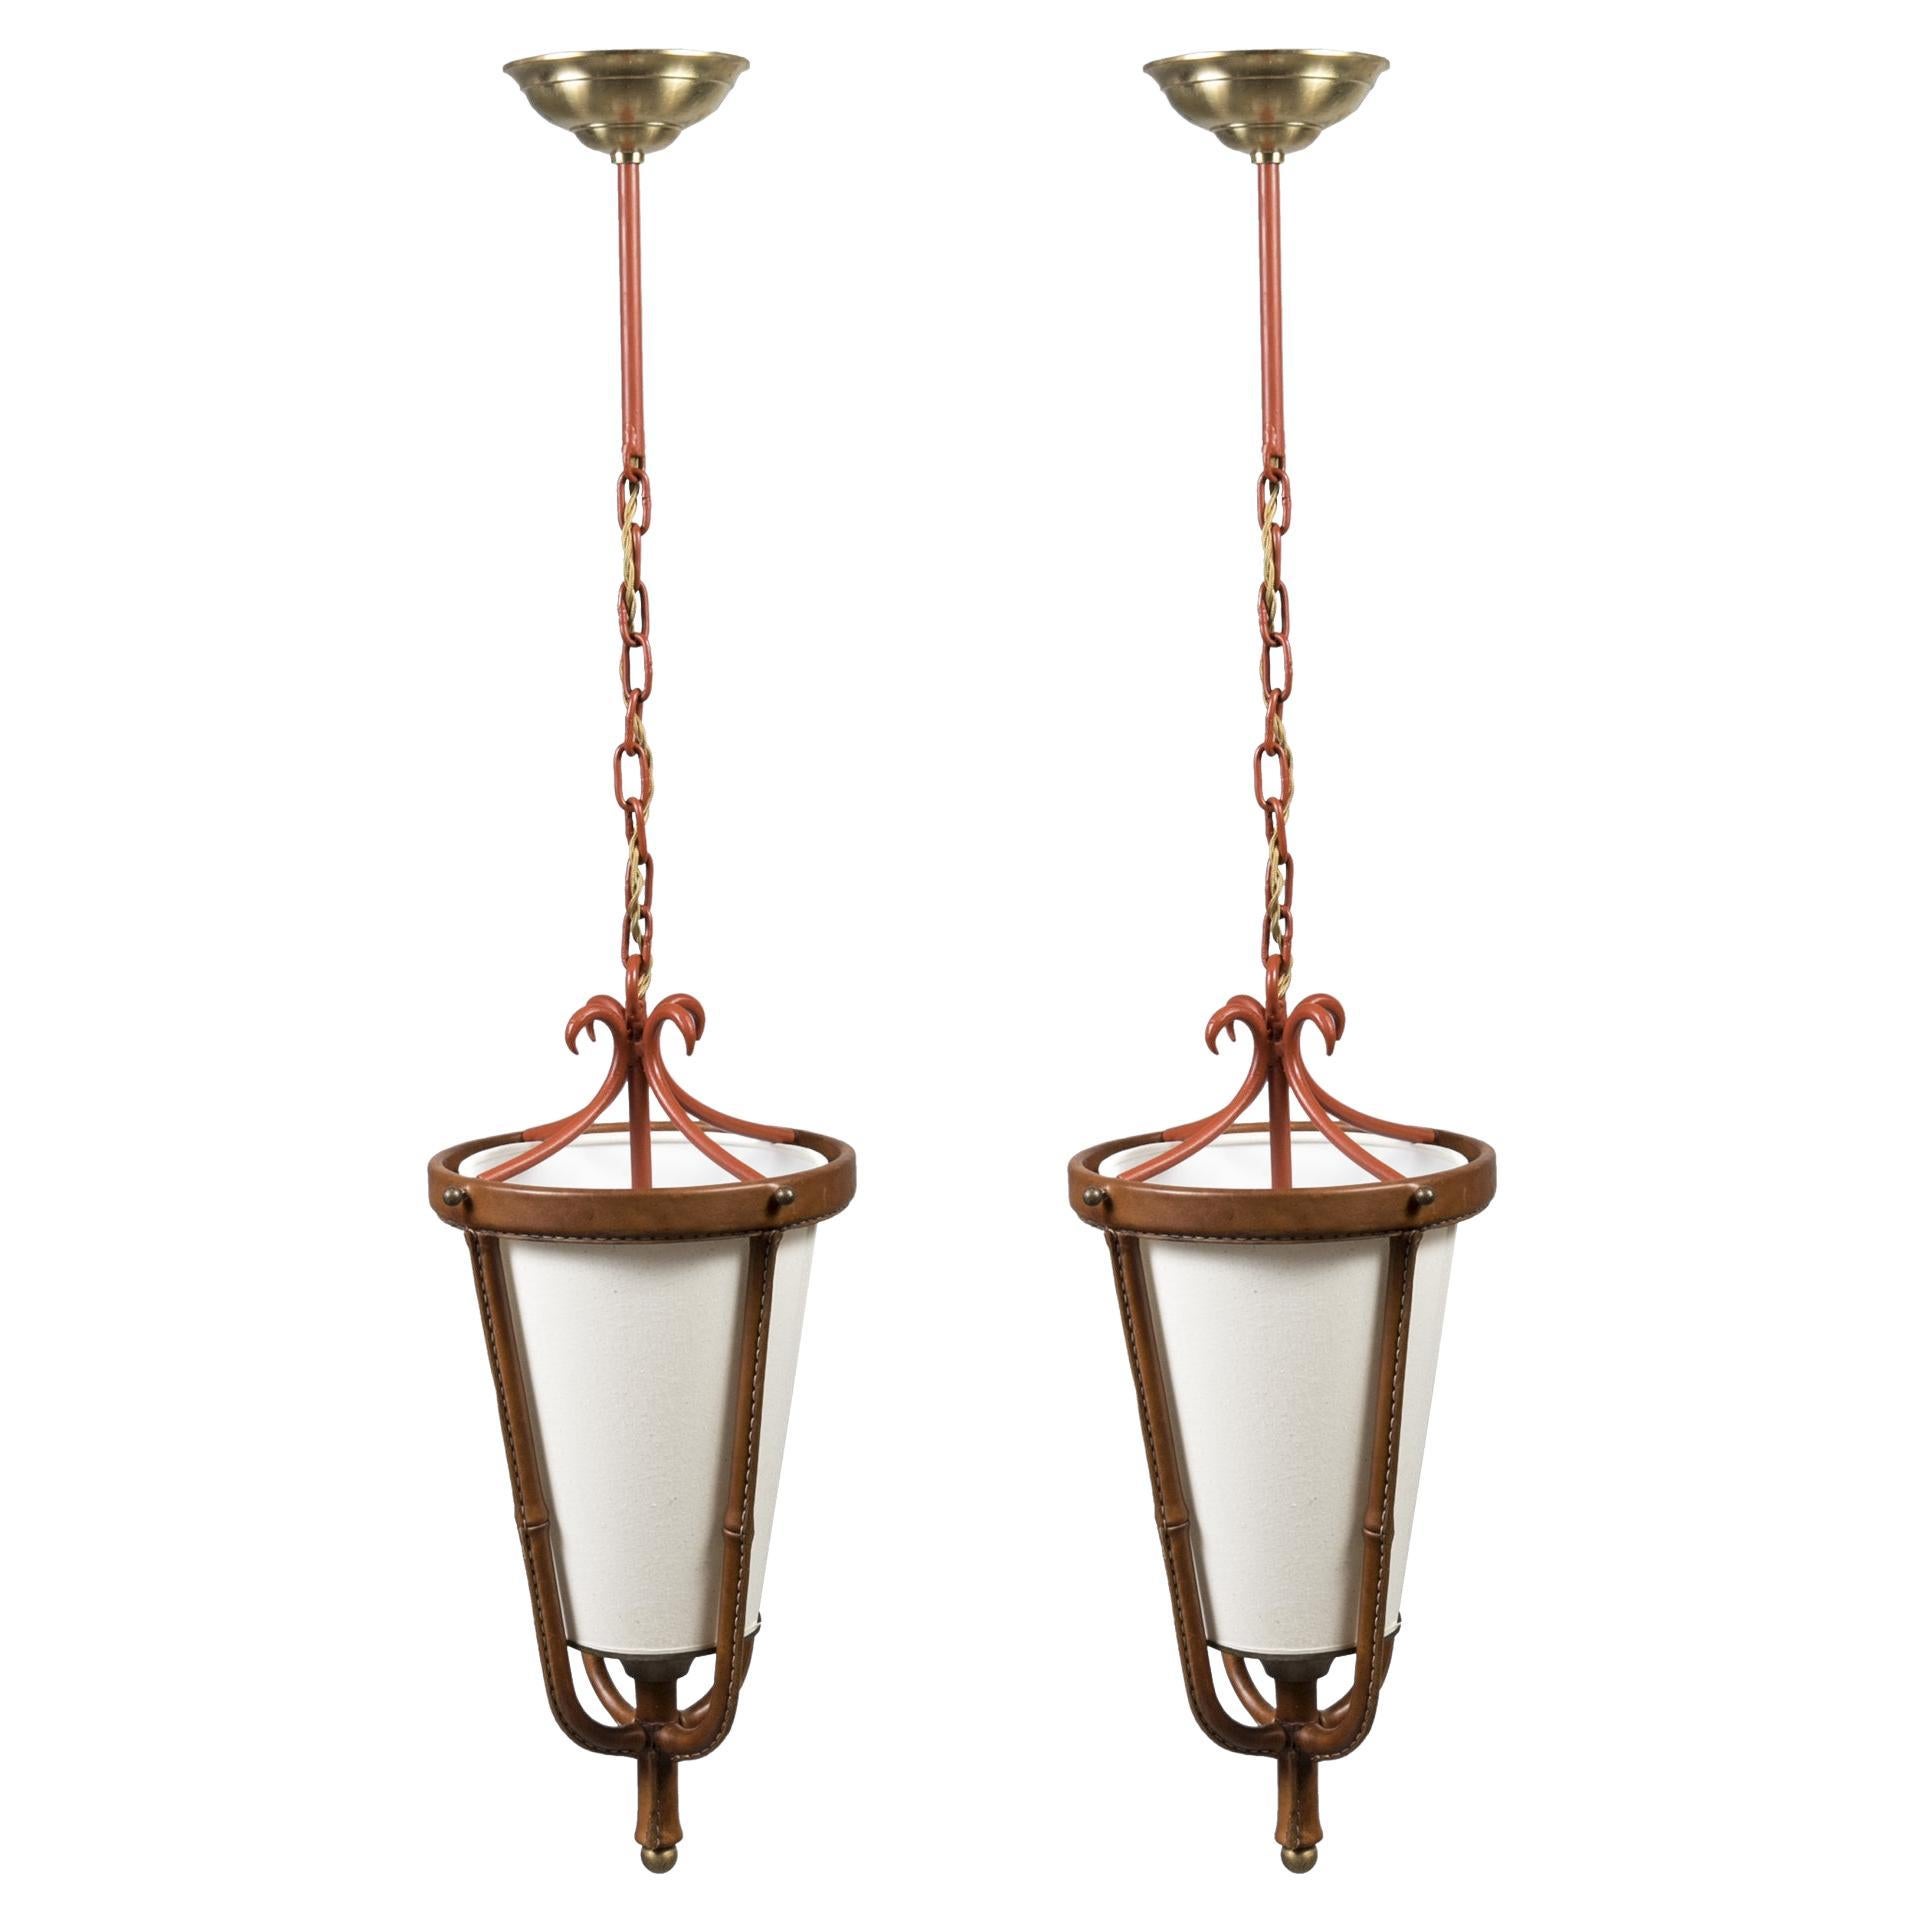 1950's Stitched Leather Pair of Lanterns of Lantern by Jacques Adnet